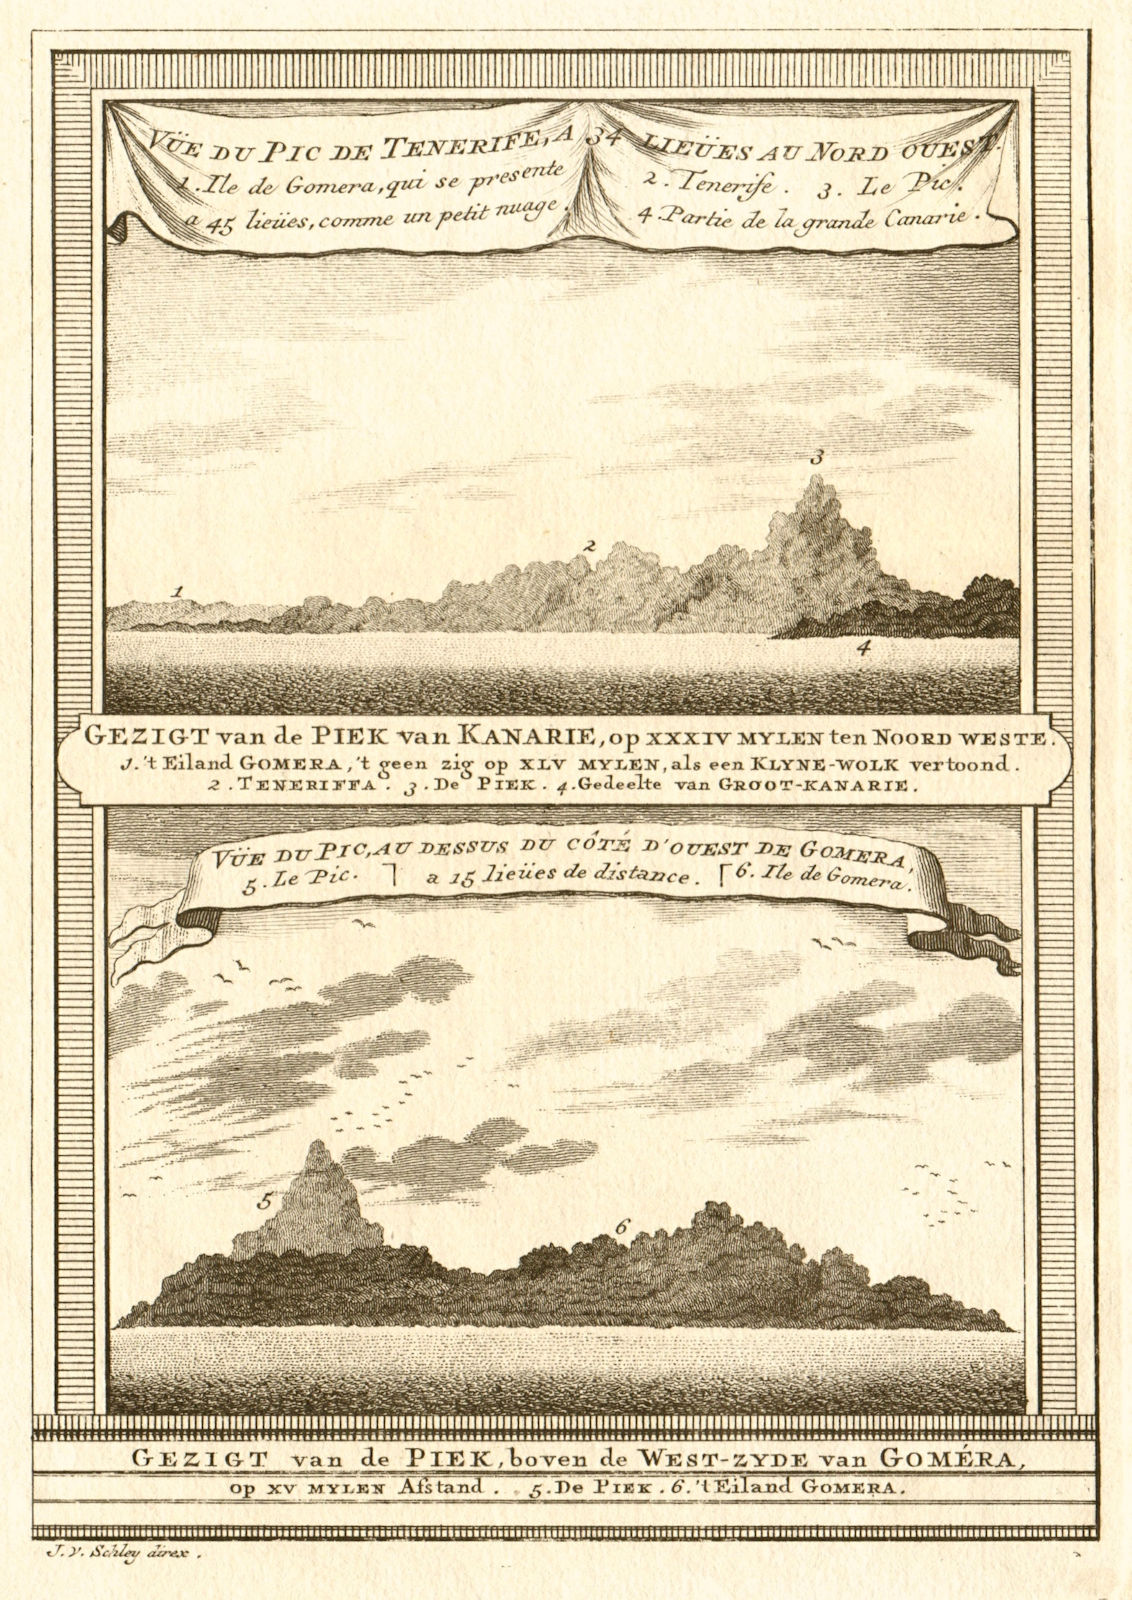 Mount Teide, Tenerife, Canary islands. From NW & behind Gomera. SCHLEY 1747